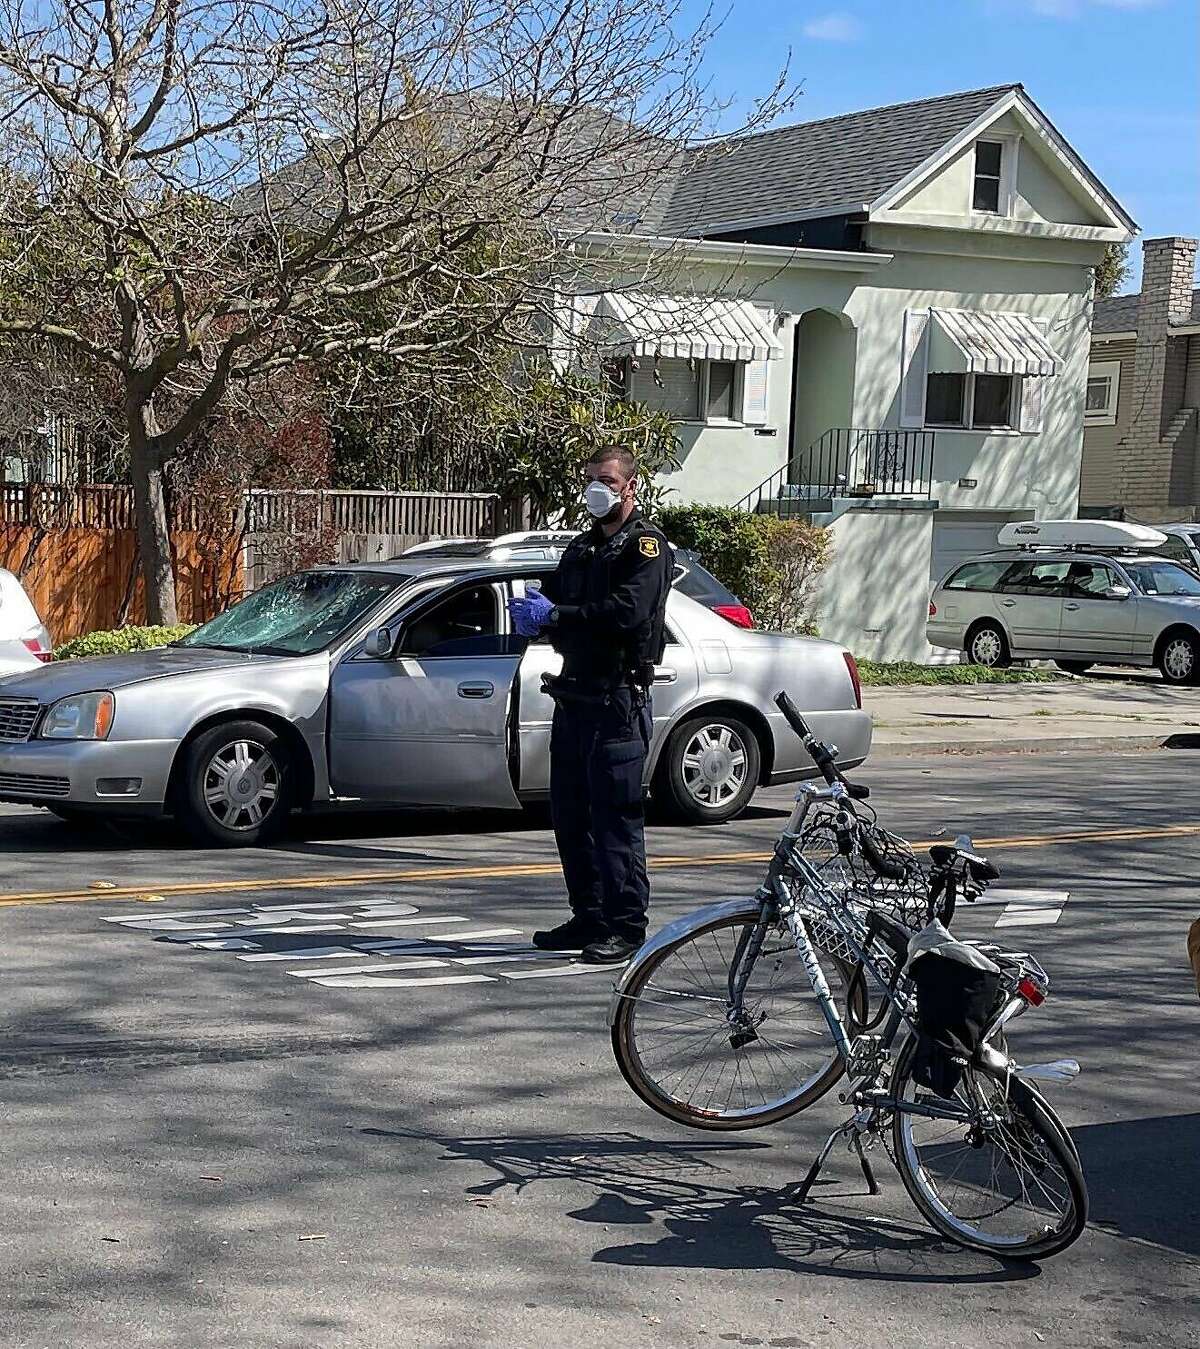 Jackie Erbe, a bike lane activist, was rear-ended by a car on Mar.16, 2021 while bicycling with her 8-year old child on 9th Street near Channing Way, seen here.